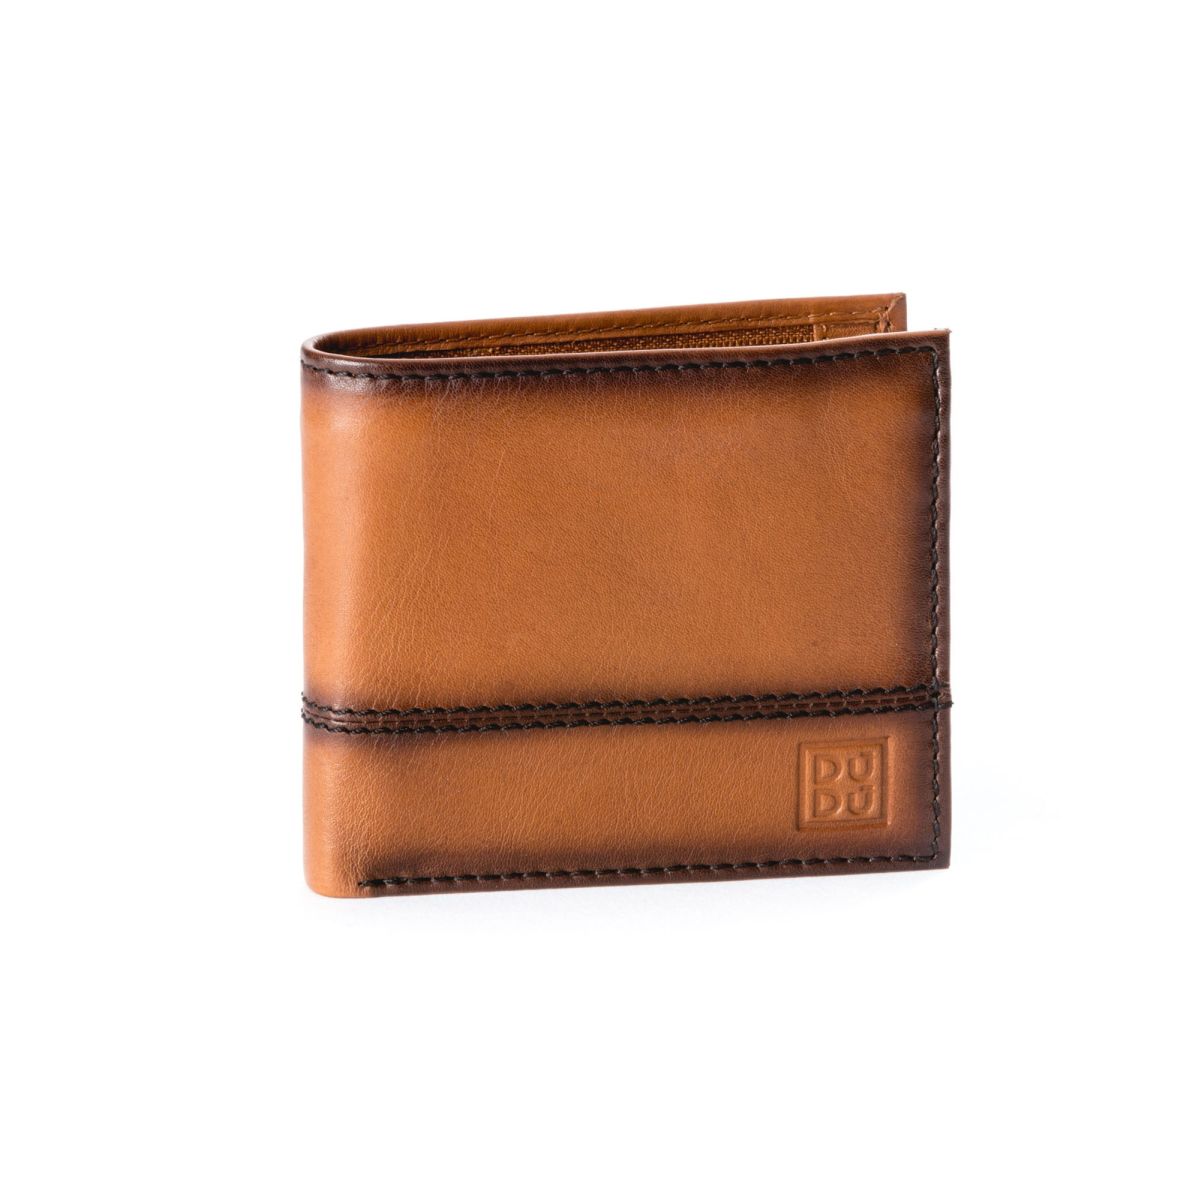 DuDu Unique Leather Wallet With Coin Purse - Light Brown